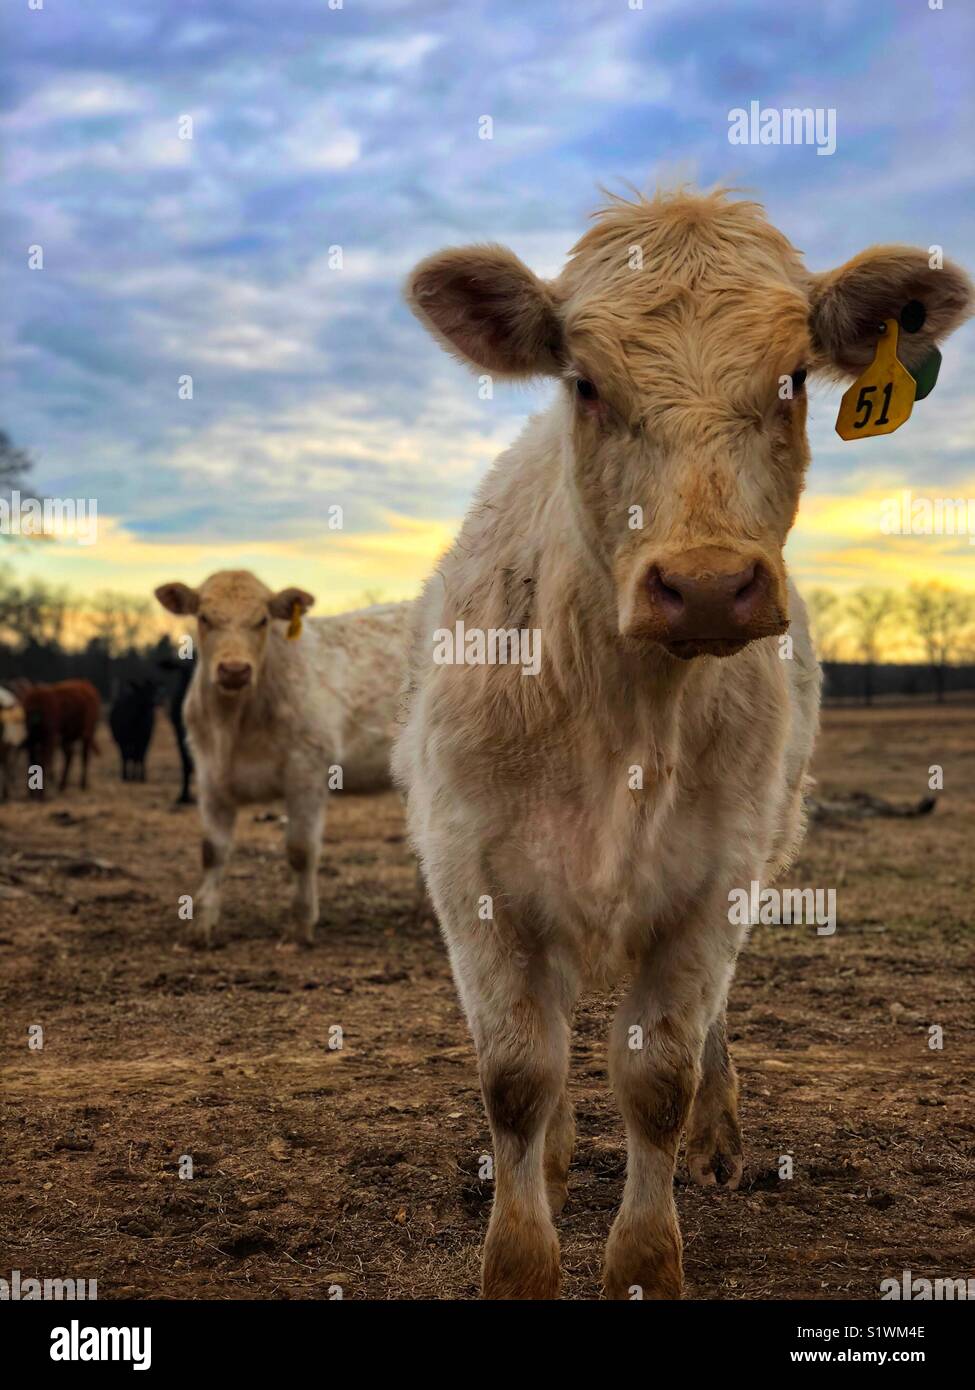 Cow looking directly at camera Stock Photo